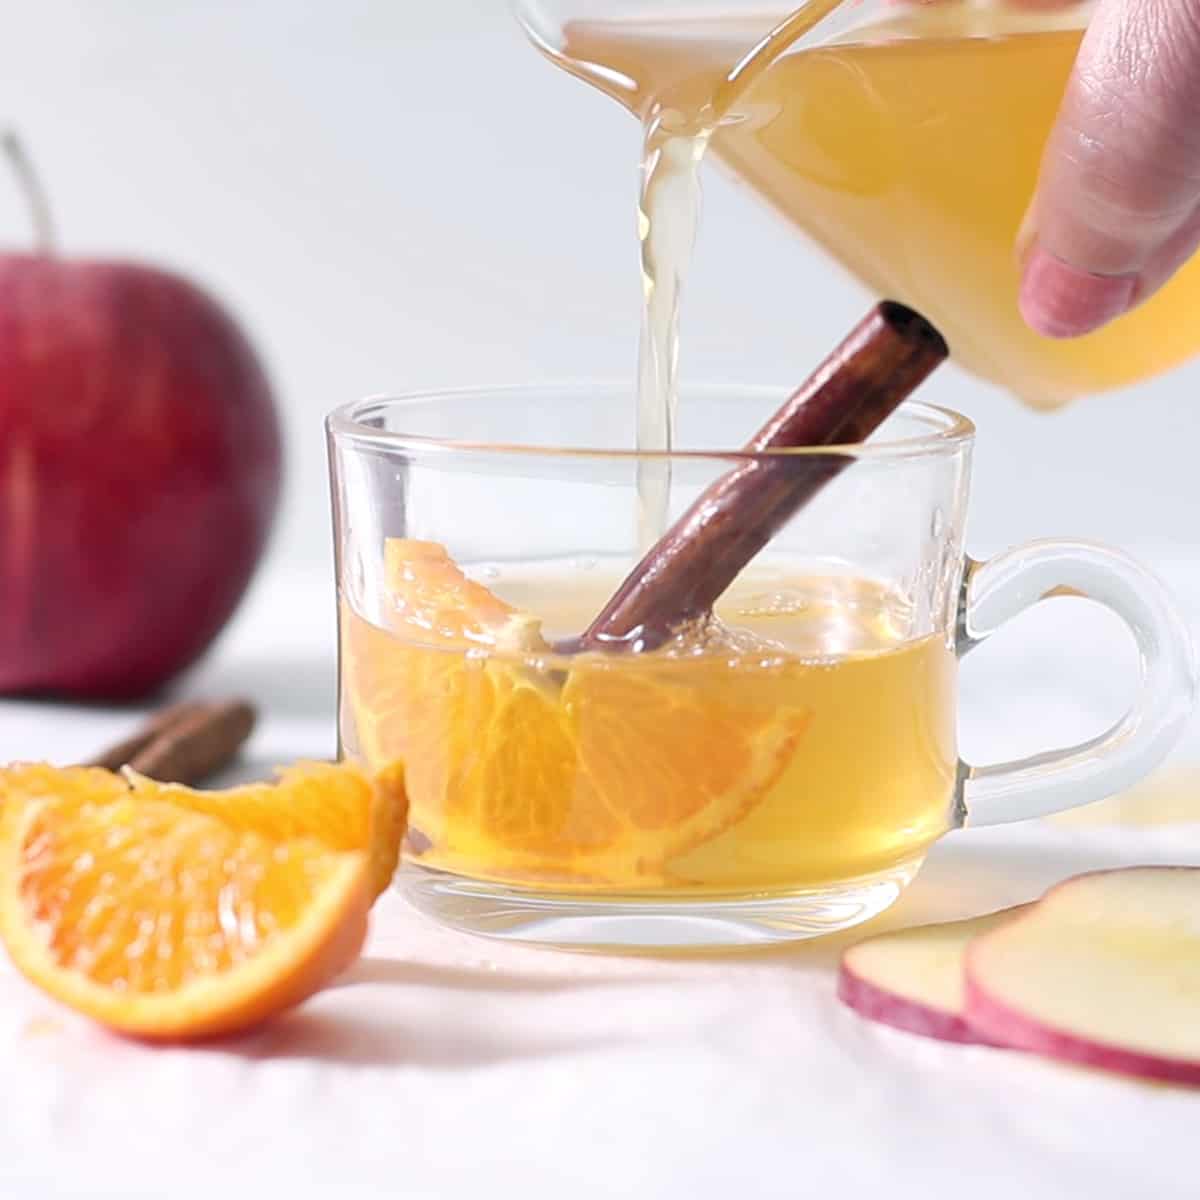 pouring apple cider that has been spiced, with a cinnamon stick.